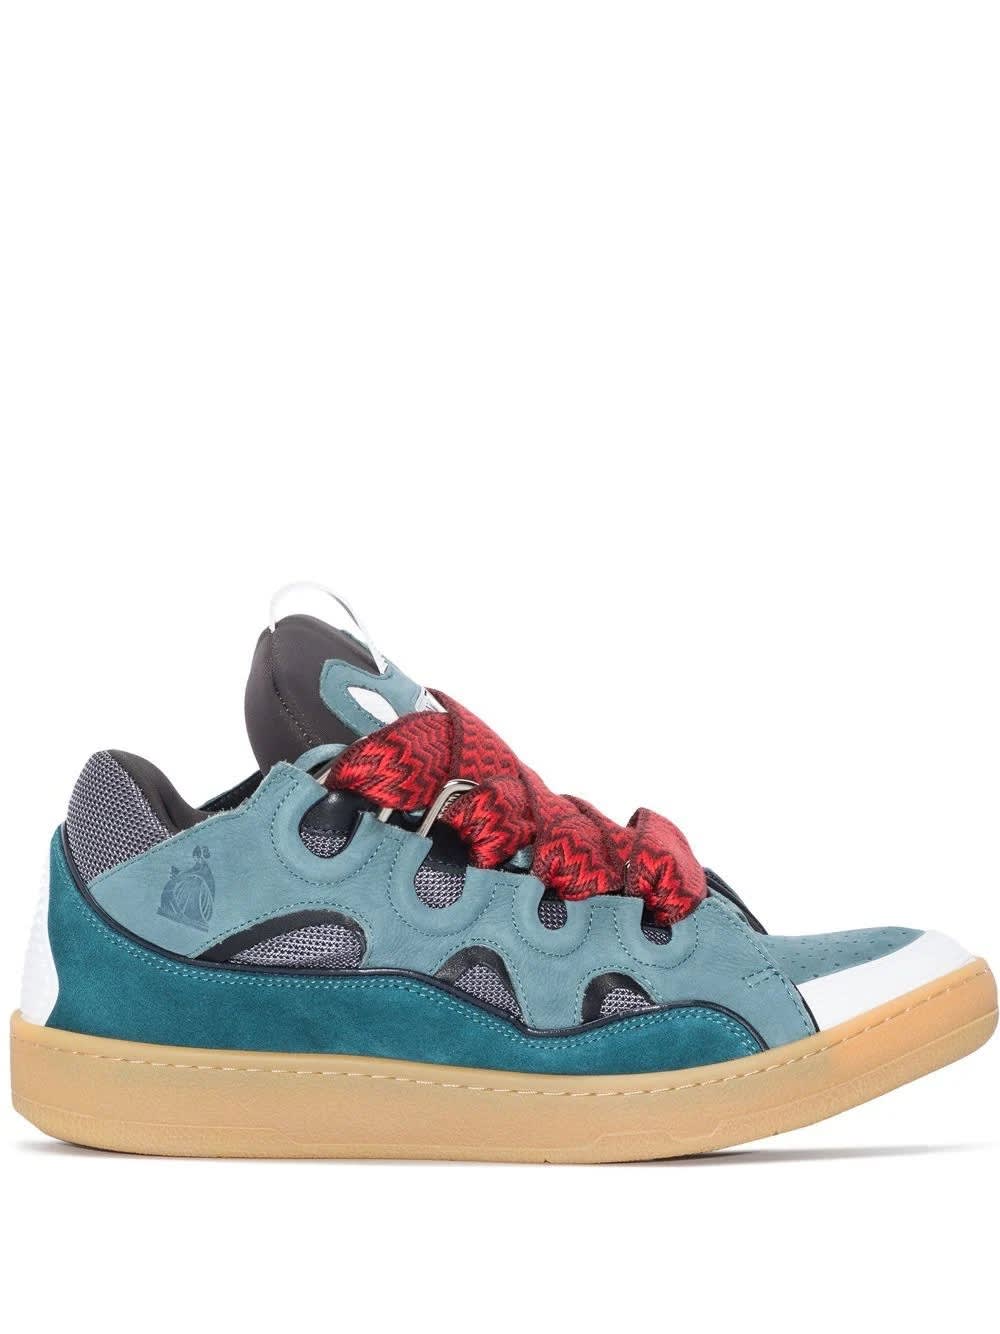 Shop Lanvin Curb Sneakers In Blue And Grey Leather